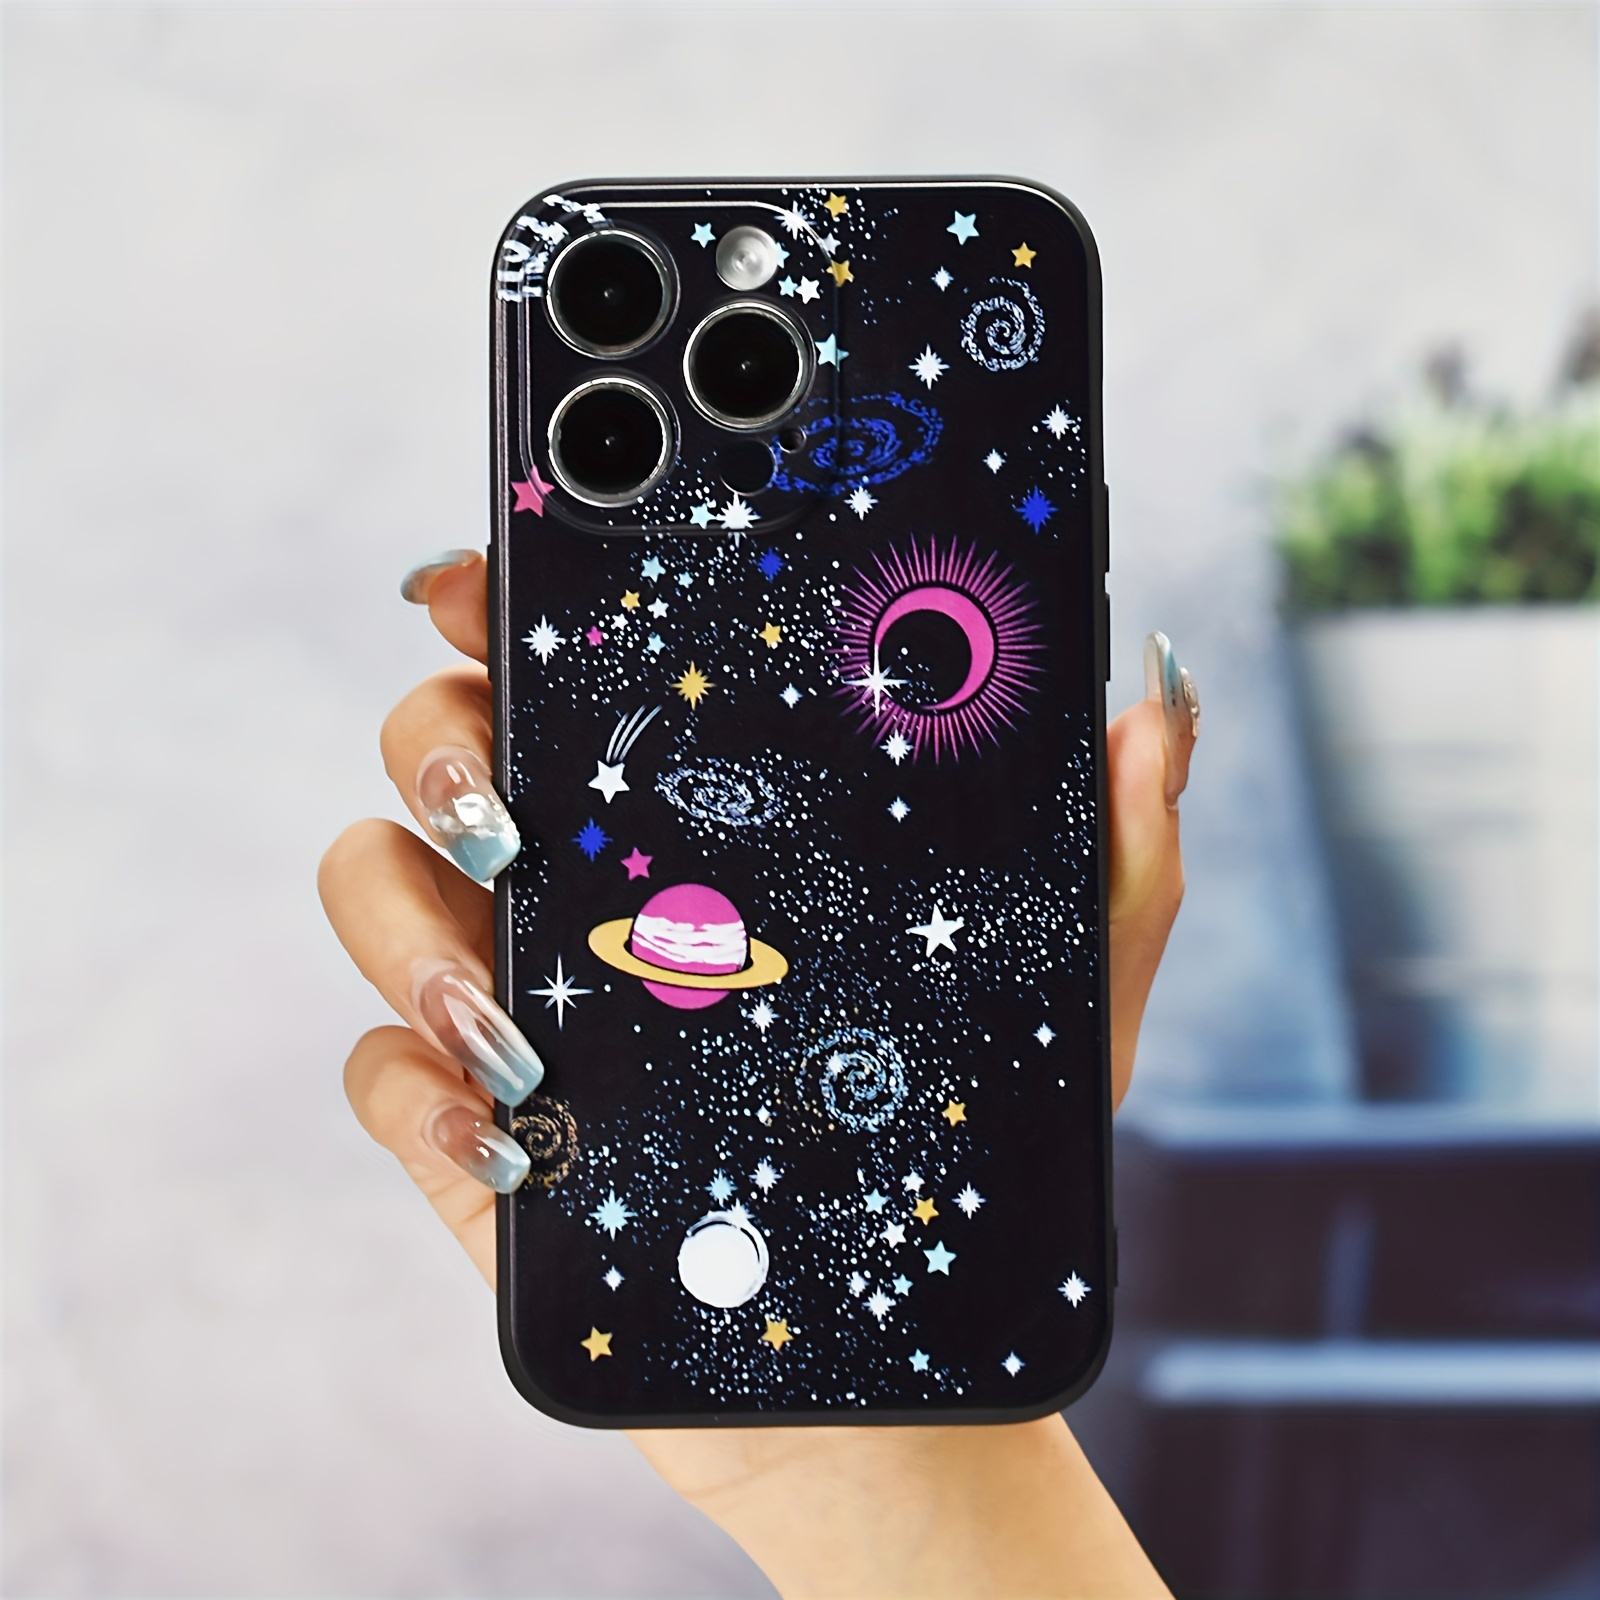 

Cosmic Starry Sky Pattern Phone Case - Protect Your Iphone 14/13/12/11 Xs/xr/x/7/8/6s Mini Plus Pro Max Se - Perfect Gift For Birthdays/easter/boys/girlfriends!